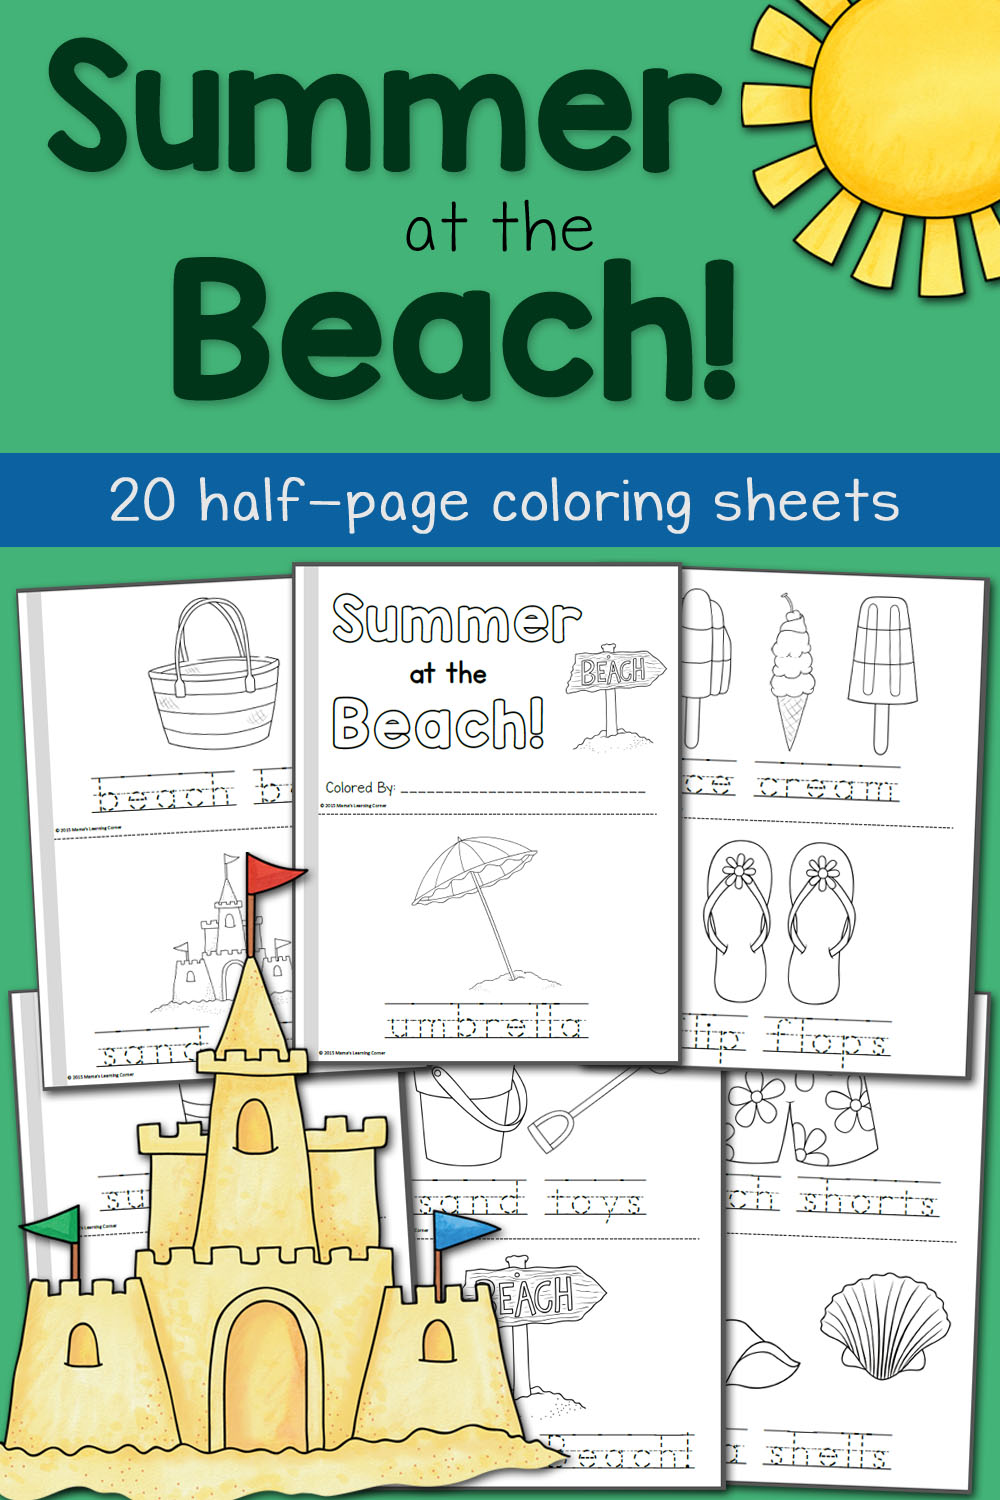 Summer Coloring Pages: At the Beach! - Mamas Learning Corner